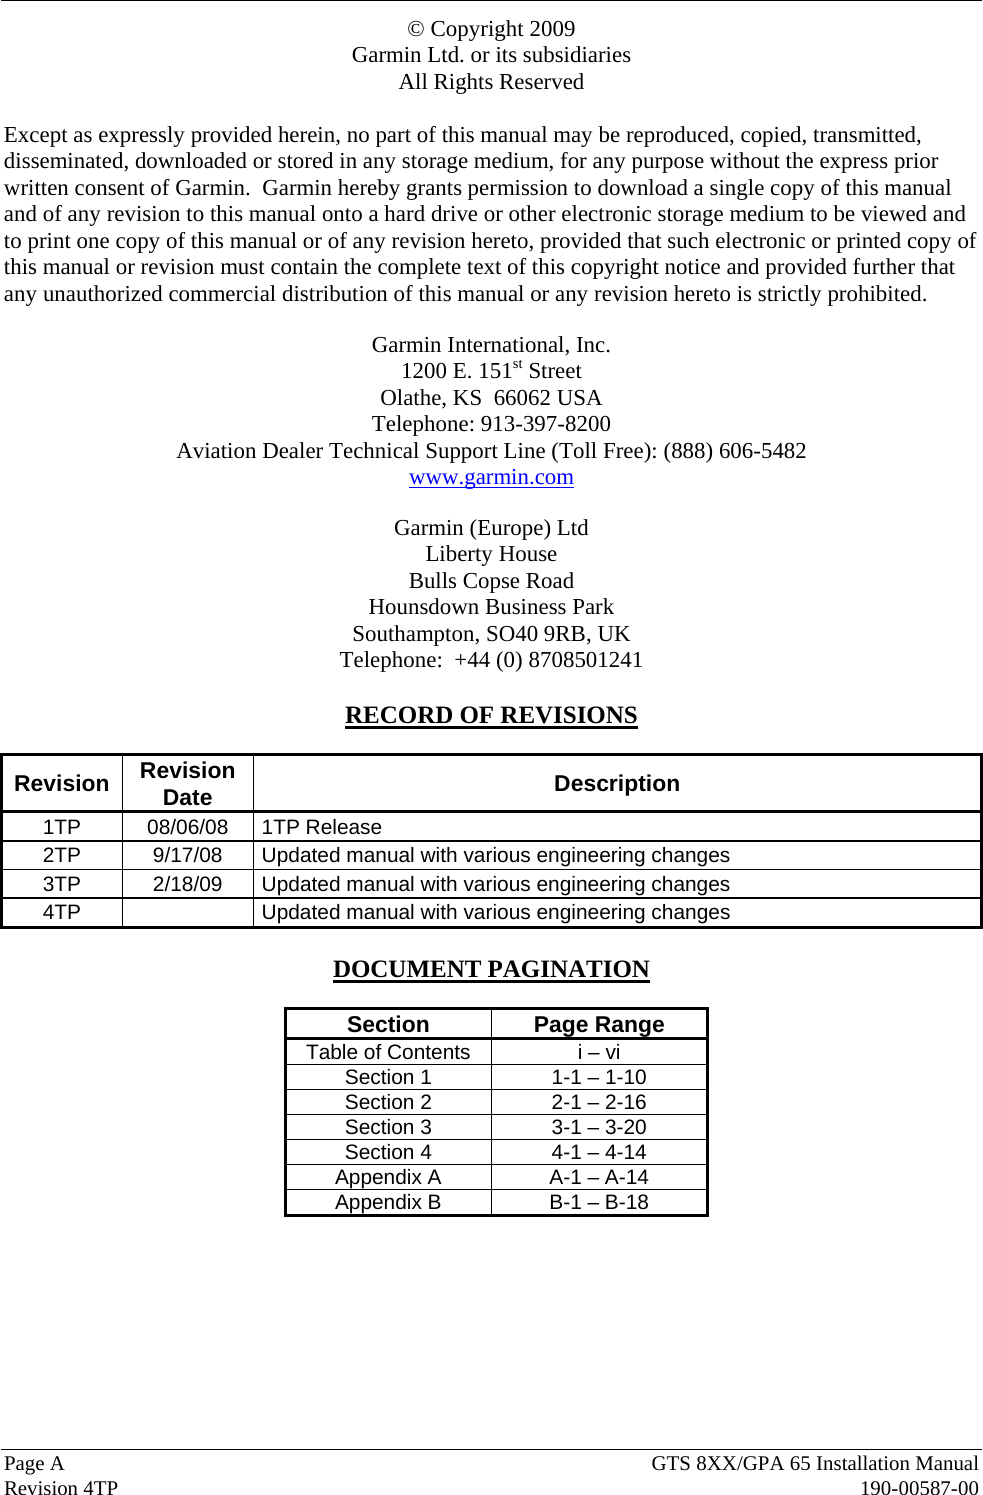  Page A  GTS 8XX/GPA 65 Installation Manual  Revision 4TP  190-00587-00 © Copyright 2009 Garmin Ltd. or its subsidiaries All Rights Reserved  Except as expressly provided herein, no part of this manual may be reproduced, copied, transmitted, disseminated, downloaded or stored in any storage medium, for any purpose without the express prior written consent of Garmin.  Garmin hereby grants permission to download a single copy of this manual and of any revision to this manual onto a hard drive or other electronic storage medium to be viewed and to print one copy of this manual or of any revision hereto, provided that such electronic or printed copy of this manual or revision must contain the complete text of this copyright notice and provided further that any unauthorized commercial distribution of this manual or any revision hereto is strictly prohibited.  Garmin International, Inc. 1200 E. 151st Street Olathe, KS  66062 USA Telephone: 913-397-8200 Aviation Dealer Technical Support Line (Toll Free): (888) 606-5482 www.garmin.com  Garmin (Europe) Ltd Liberty House Bulls Copse Road Hounsdown Business Park Southampton, SO40 9RB, UK Telephone:  +44 (0) 8708501241  RECORD OF REVISIONS  Revision  Revision Date  Description 1TP 08/06/08 1TP Release 2TP  9/17/08  Updated manual with various engineering changes 3TP  2/18/09  Updated manual with various engineering changes 4TP    Updated manual with various engineering changes  DOCUMENT PAGINATION  Section Page Range Table of Contents  i – vi Section 1  1-1 – 1-10 Section 2  2-1 – 2-16 Section 3  3-1 – 3-20 Section 4  4-1 – 4-14 Appendix A  A-1 – A-14 Appendix B  B-1 – B-18  